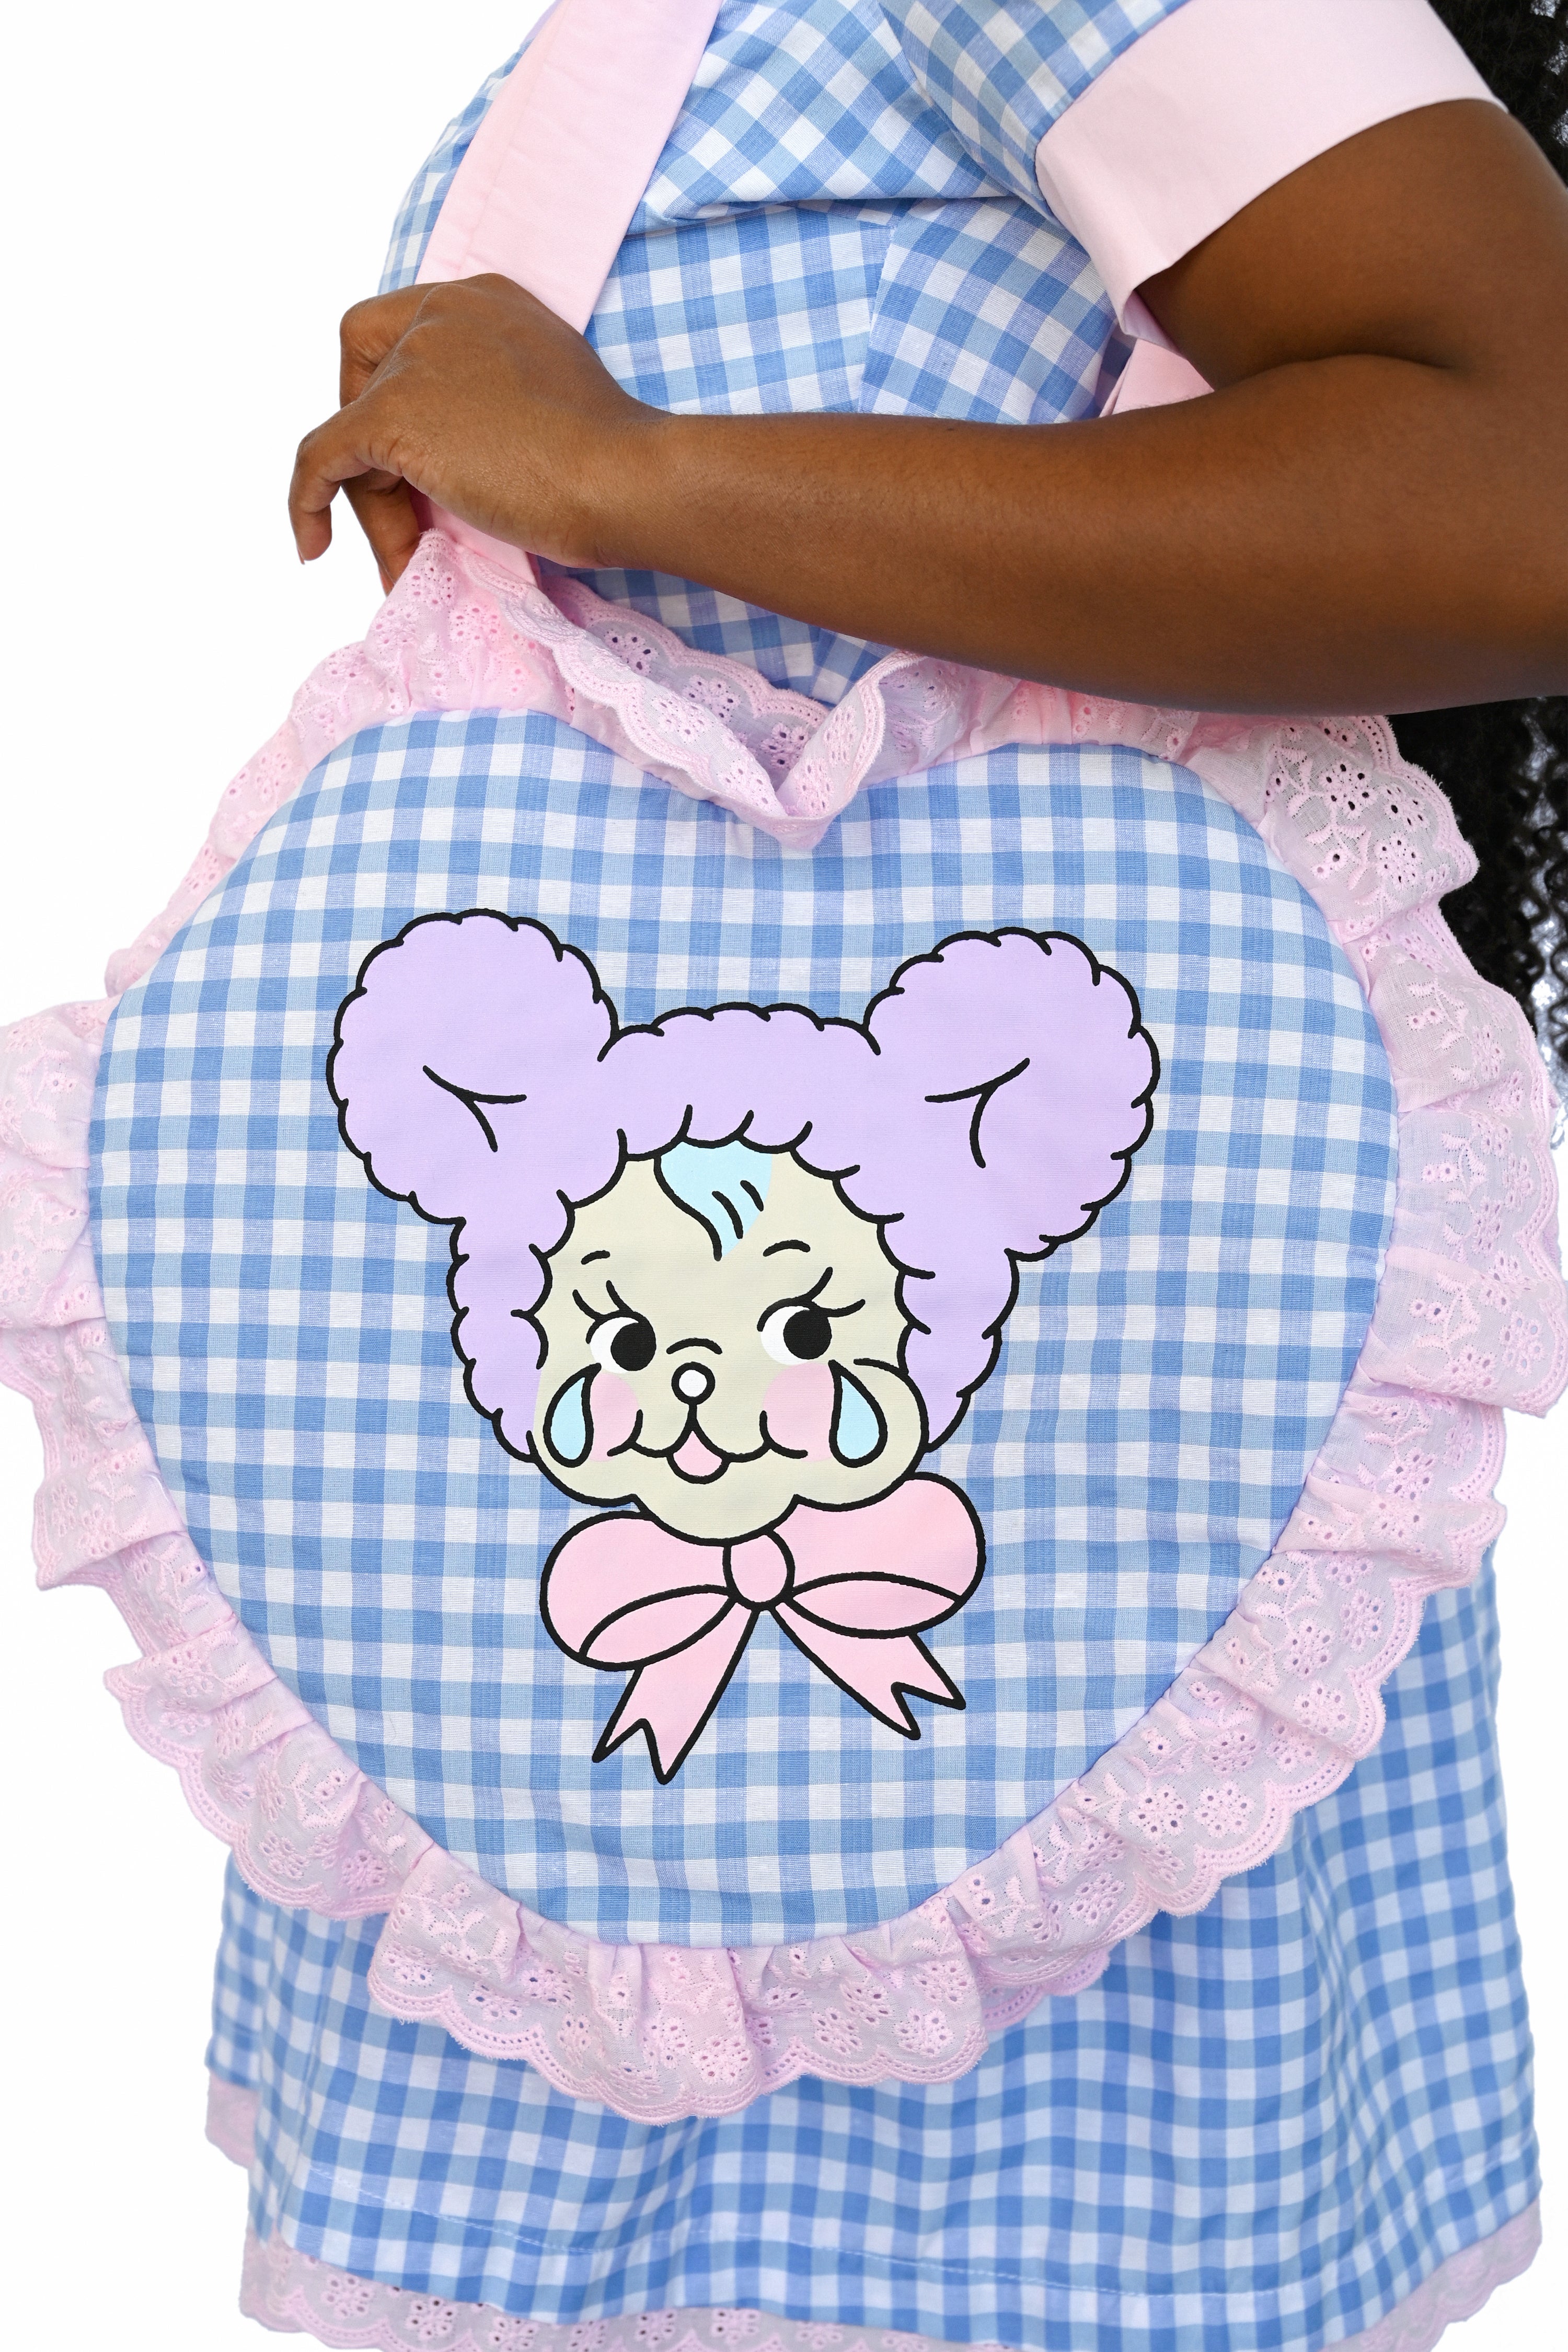 Blue gingham heart shaped bag with pink trim and hands, featuring a cute crying teddy bear graphic